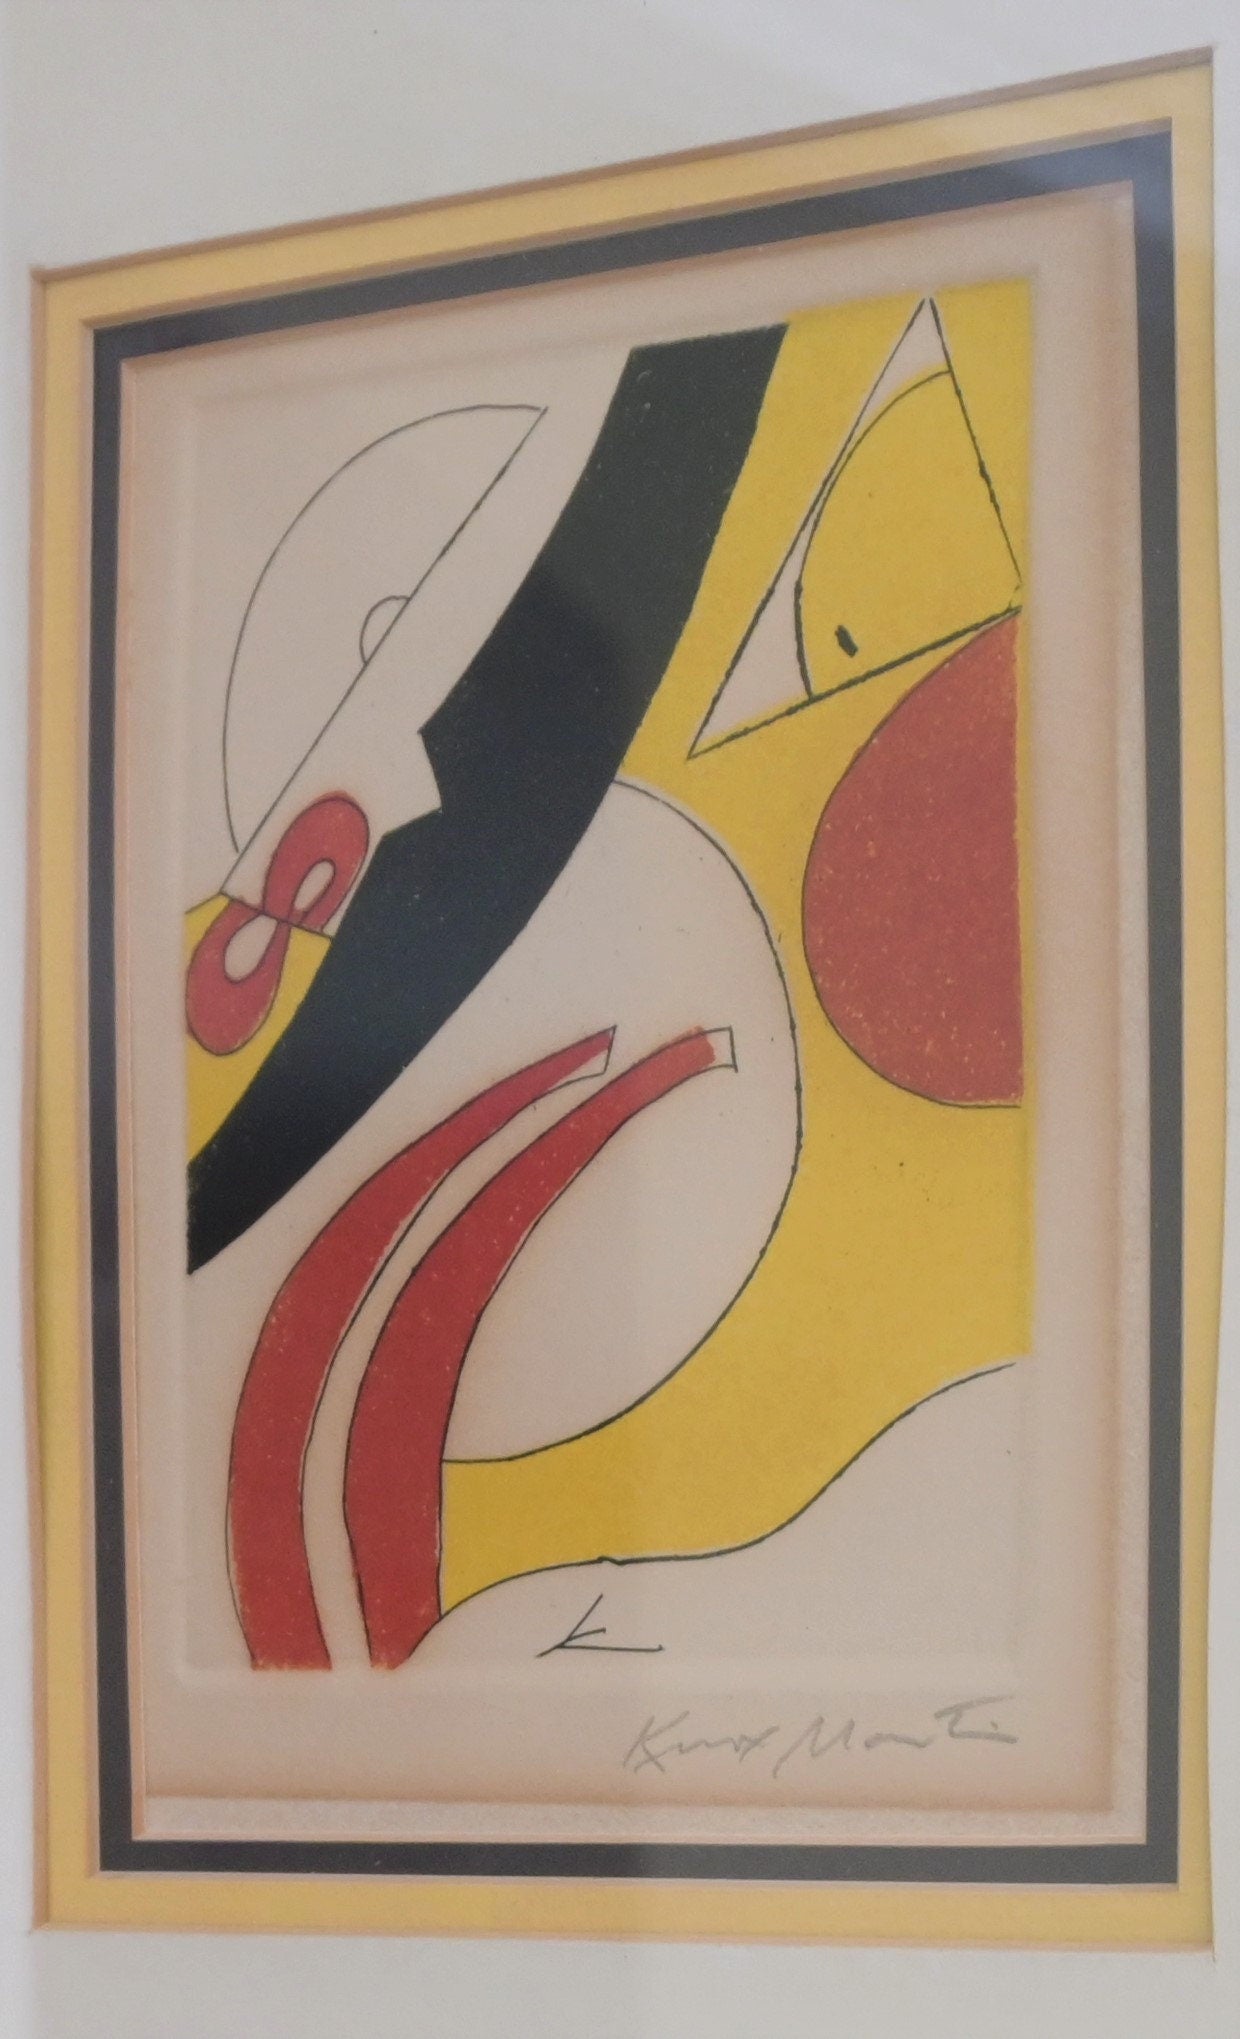 Knox Martin 'Theta Woman Series' Abstract Aquatint Framed -in many Museums- Etching & color aquatint on paper, New York City, NYC Artist